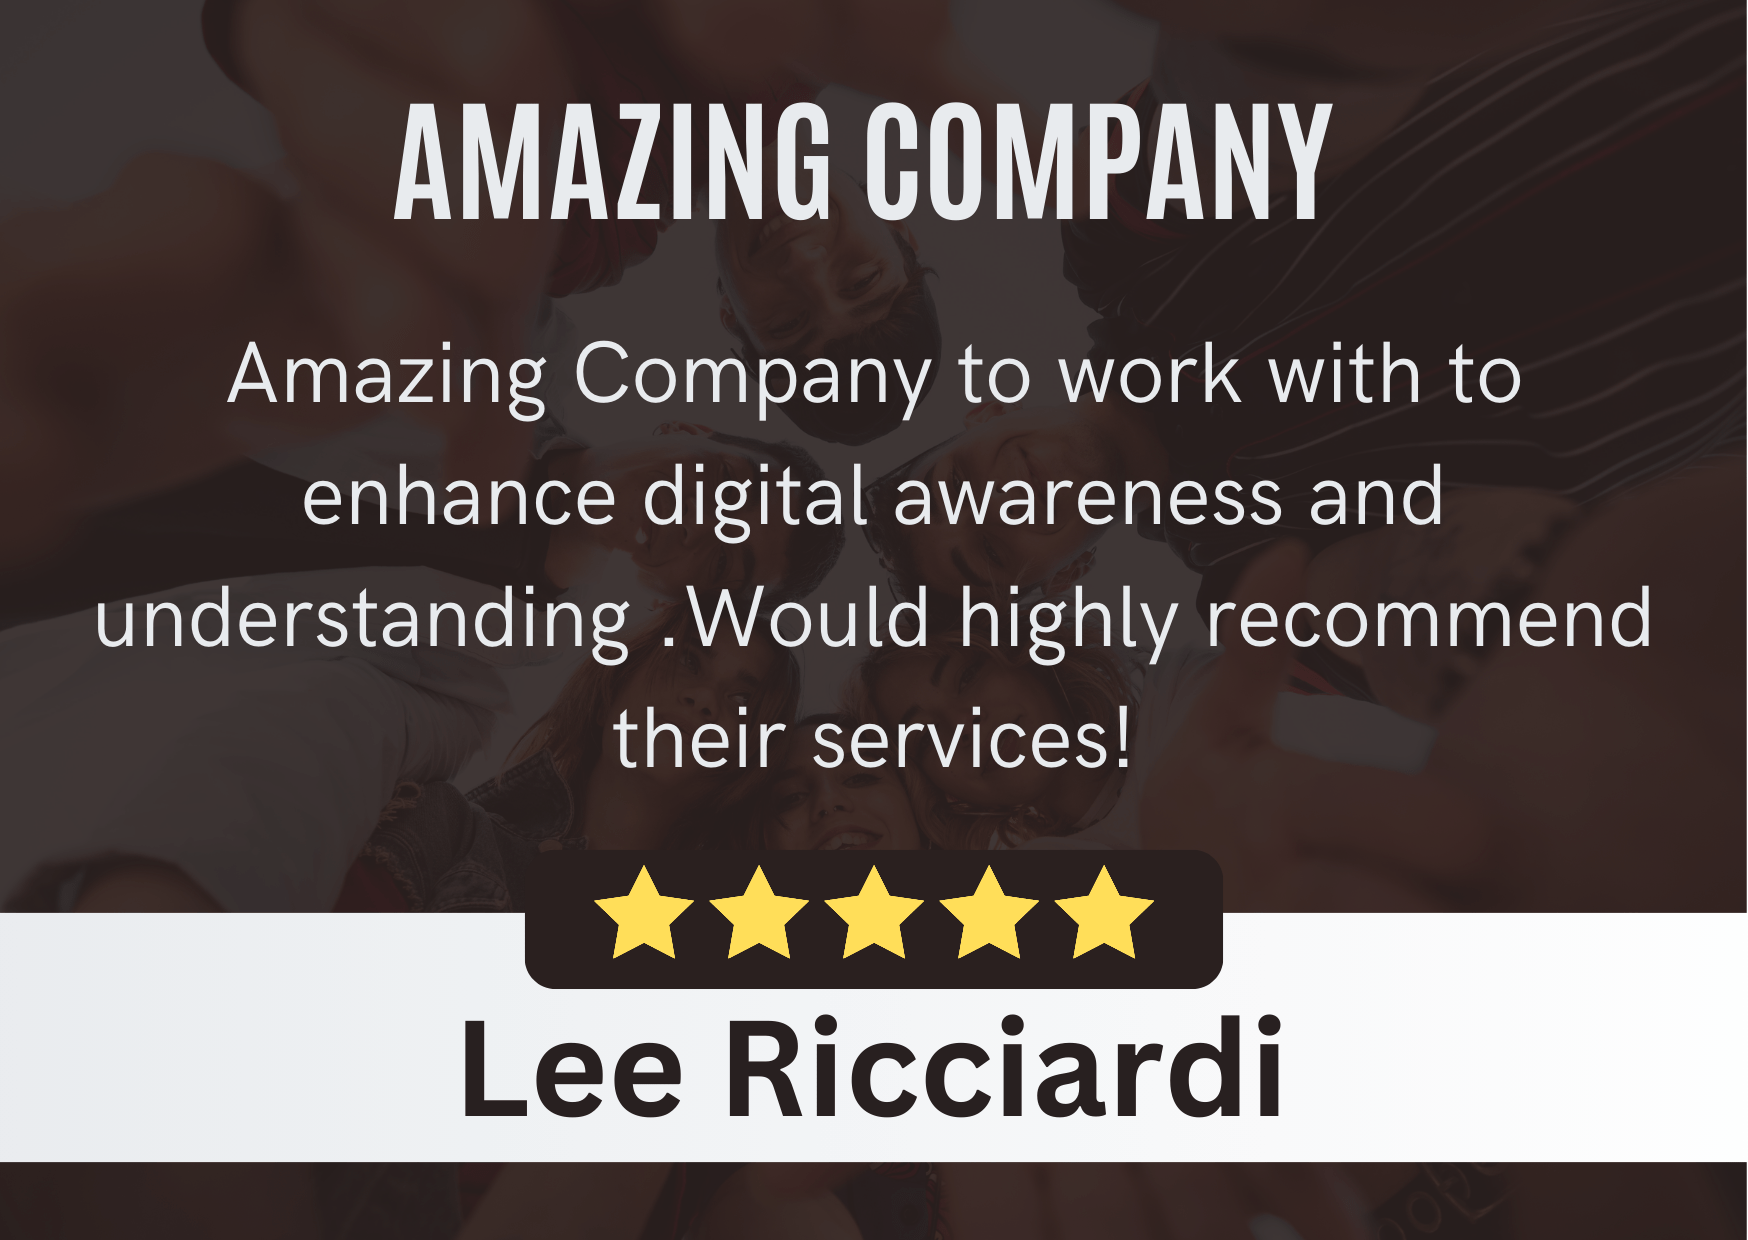 Lee Ricciardi - Edworthy Media Review | PPC Agency Social Media management Services Exeter. Review Content: Amazing company to work with to enhance digital awareness and understanding. Would highly recommend their services!